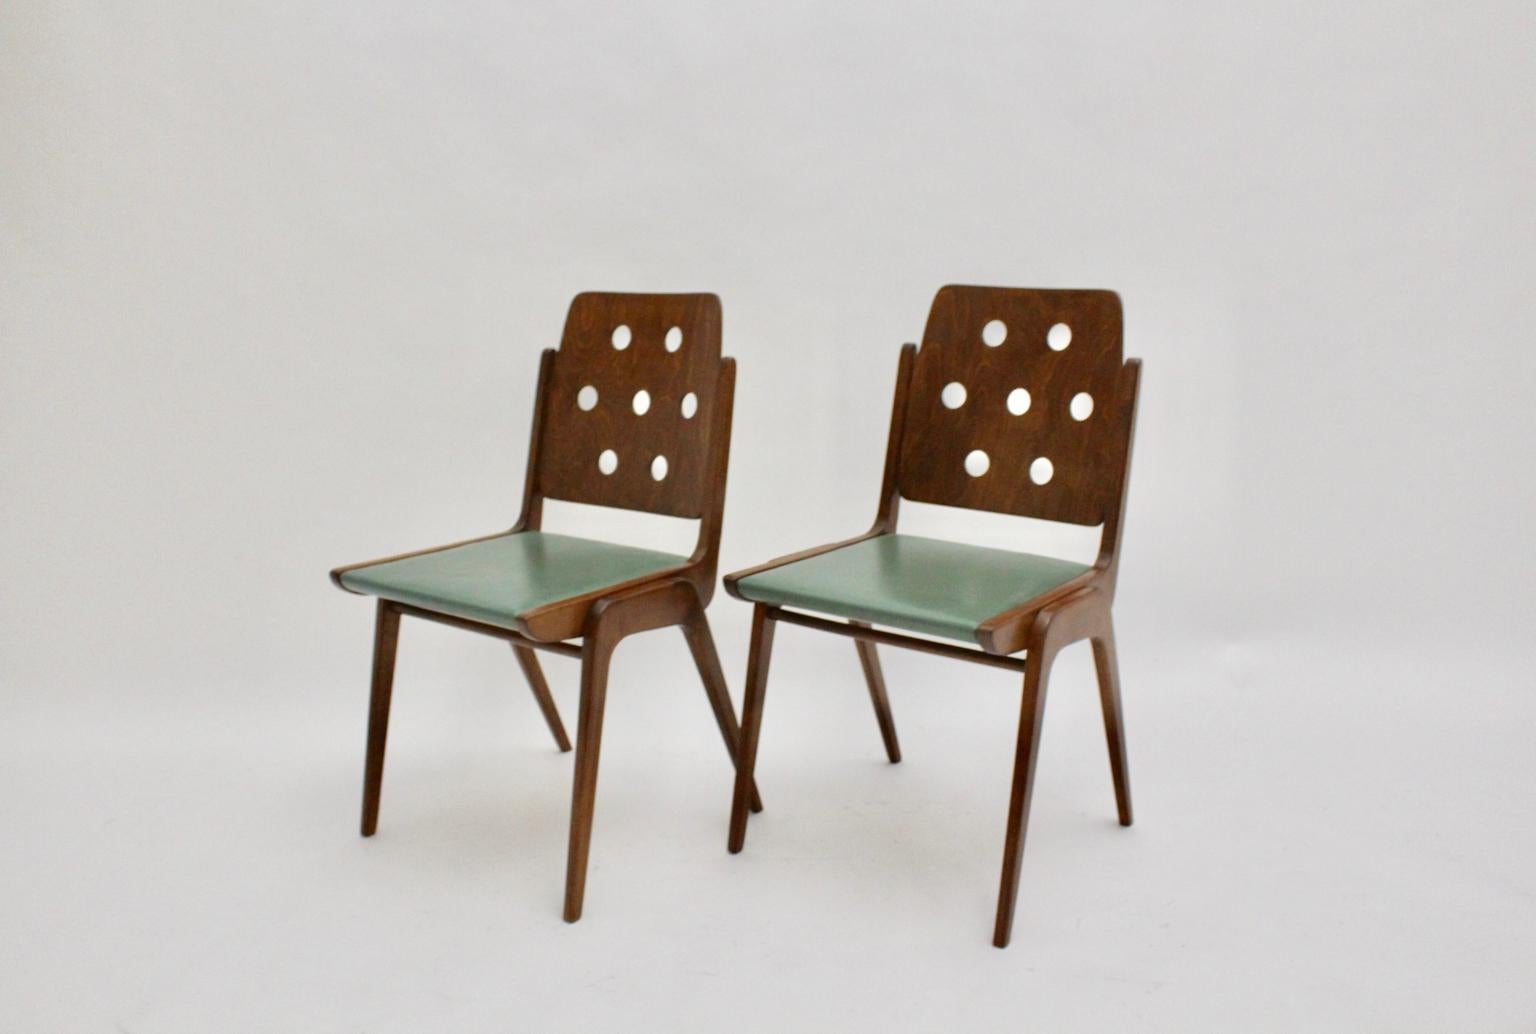 Austrian Mid-Century Modern Vintage Brown and Green Dining Chairs by Franz Schuster 1950s